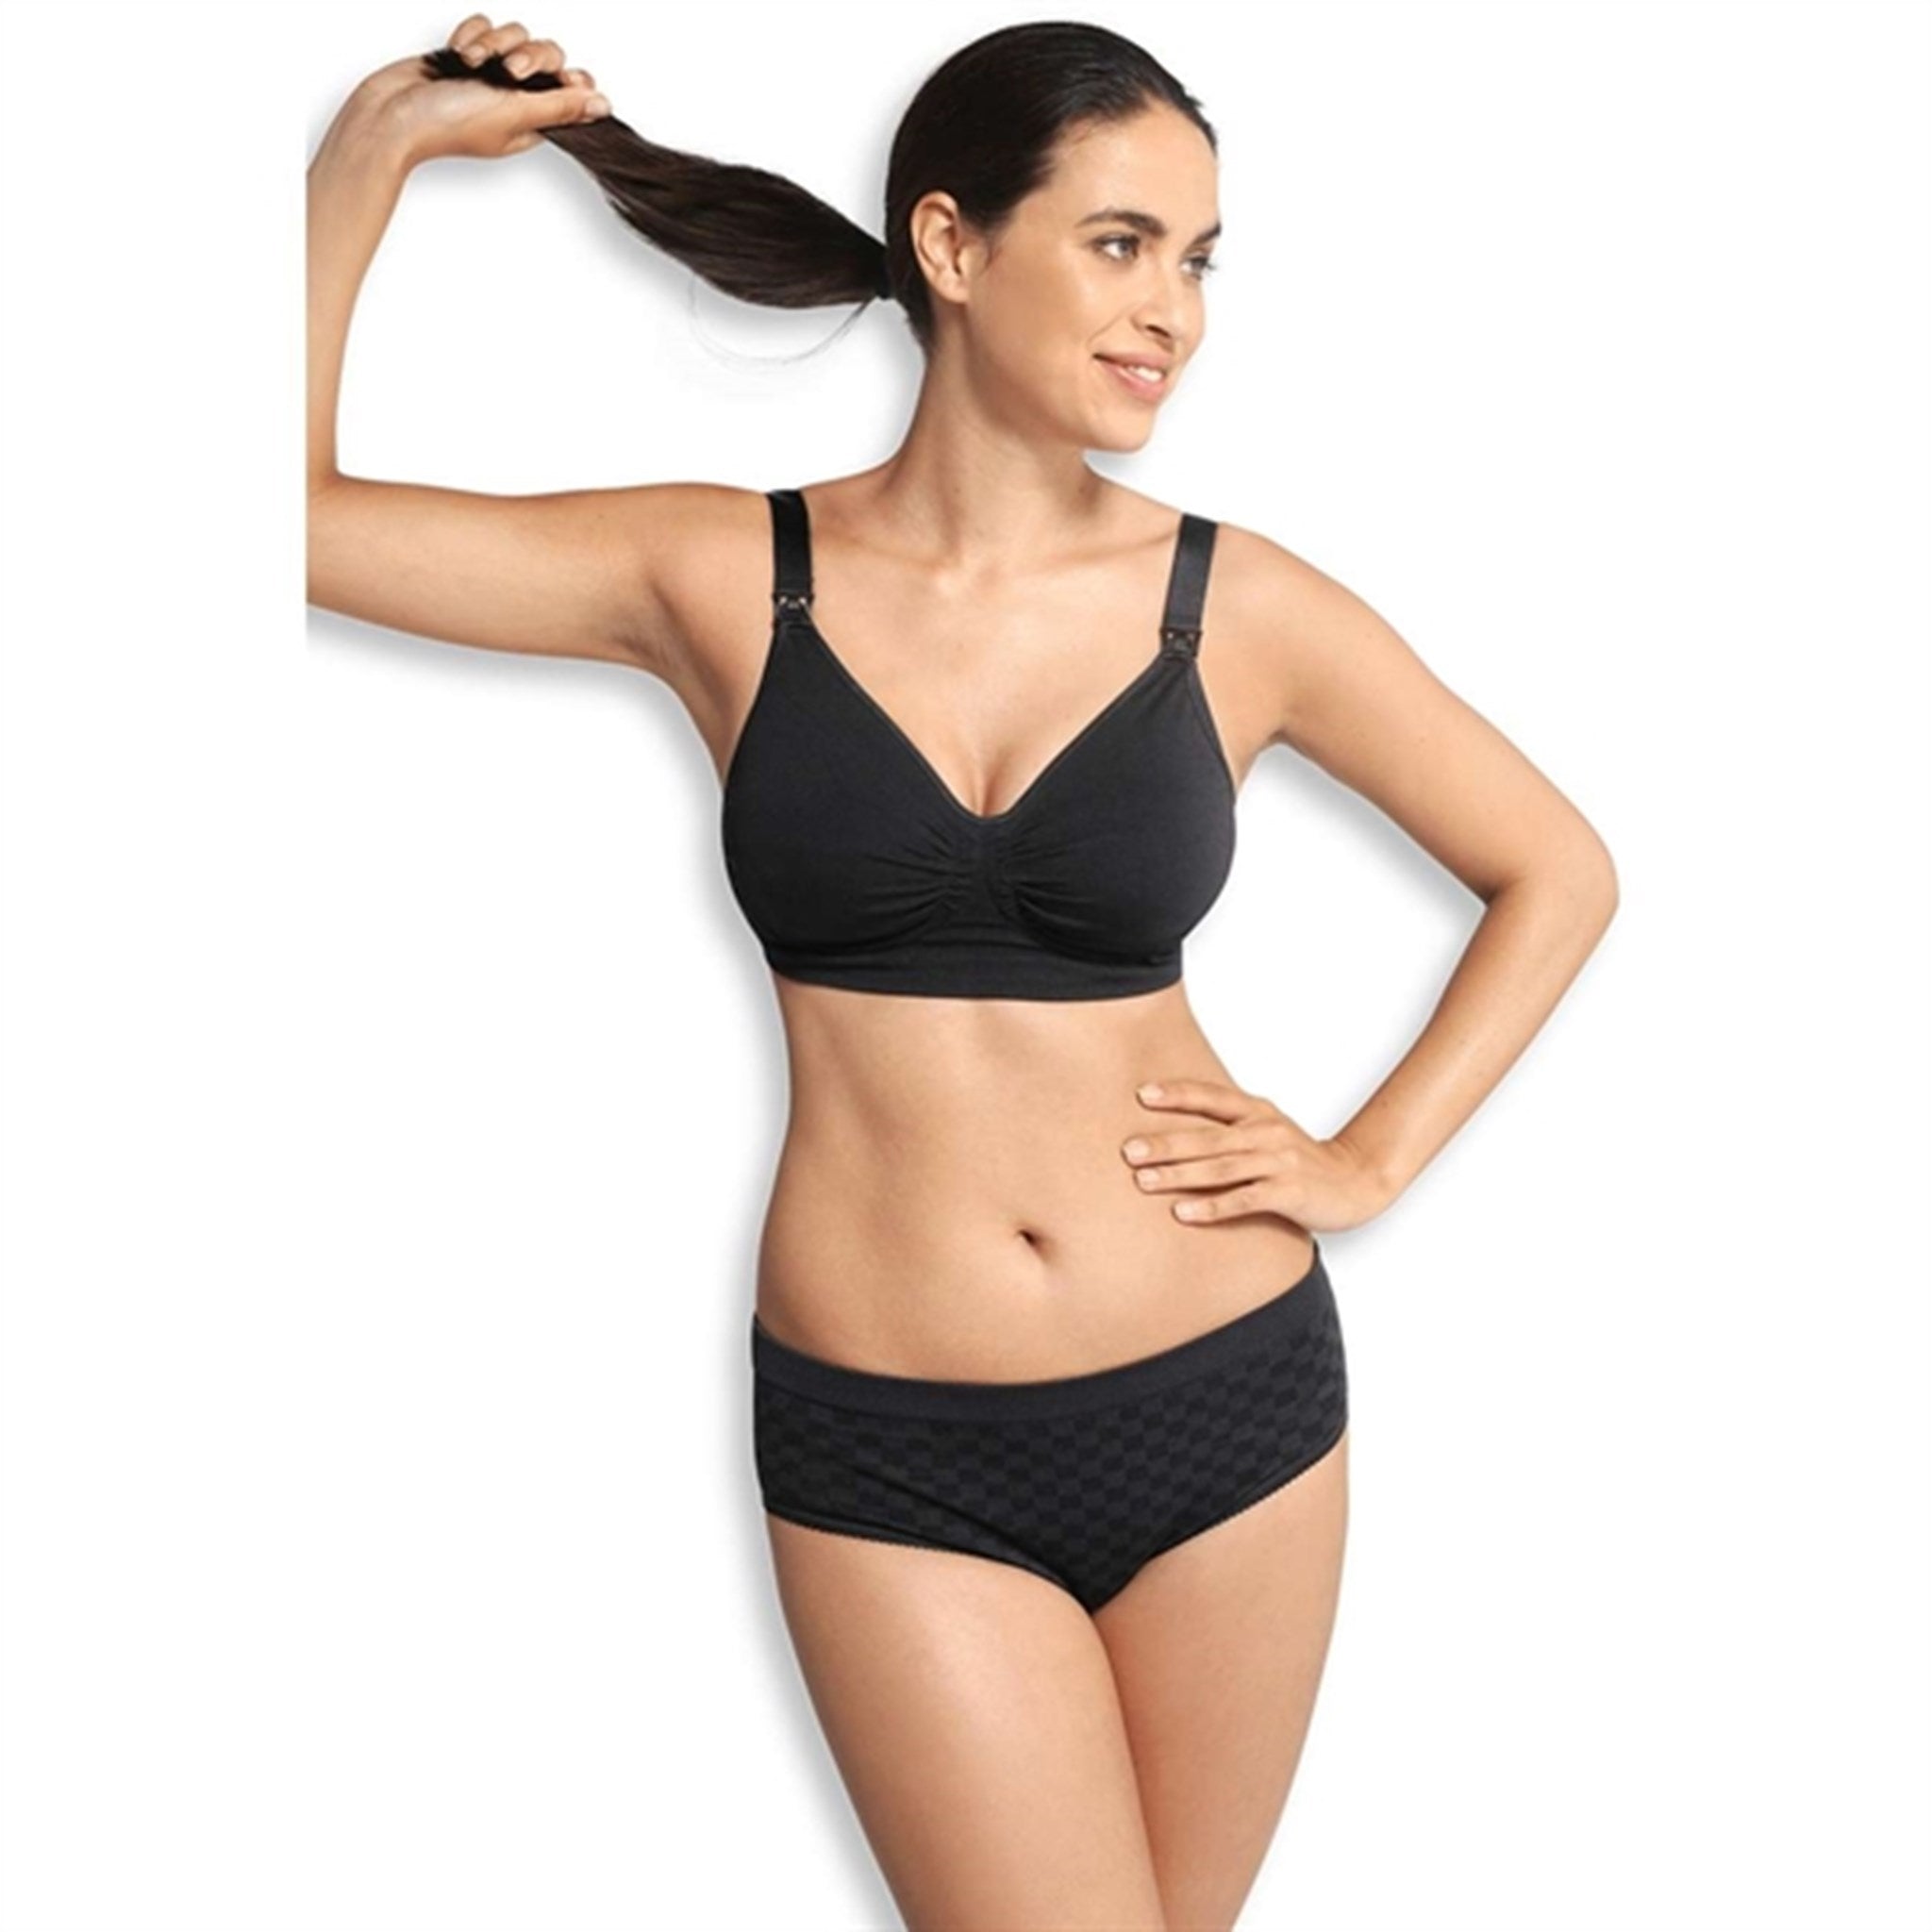 Carriwell Maternity And Nursing Bra With Carri-Gel Support Black 6